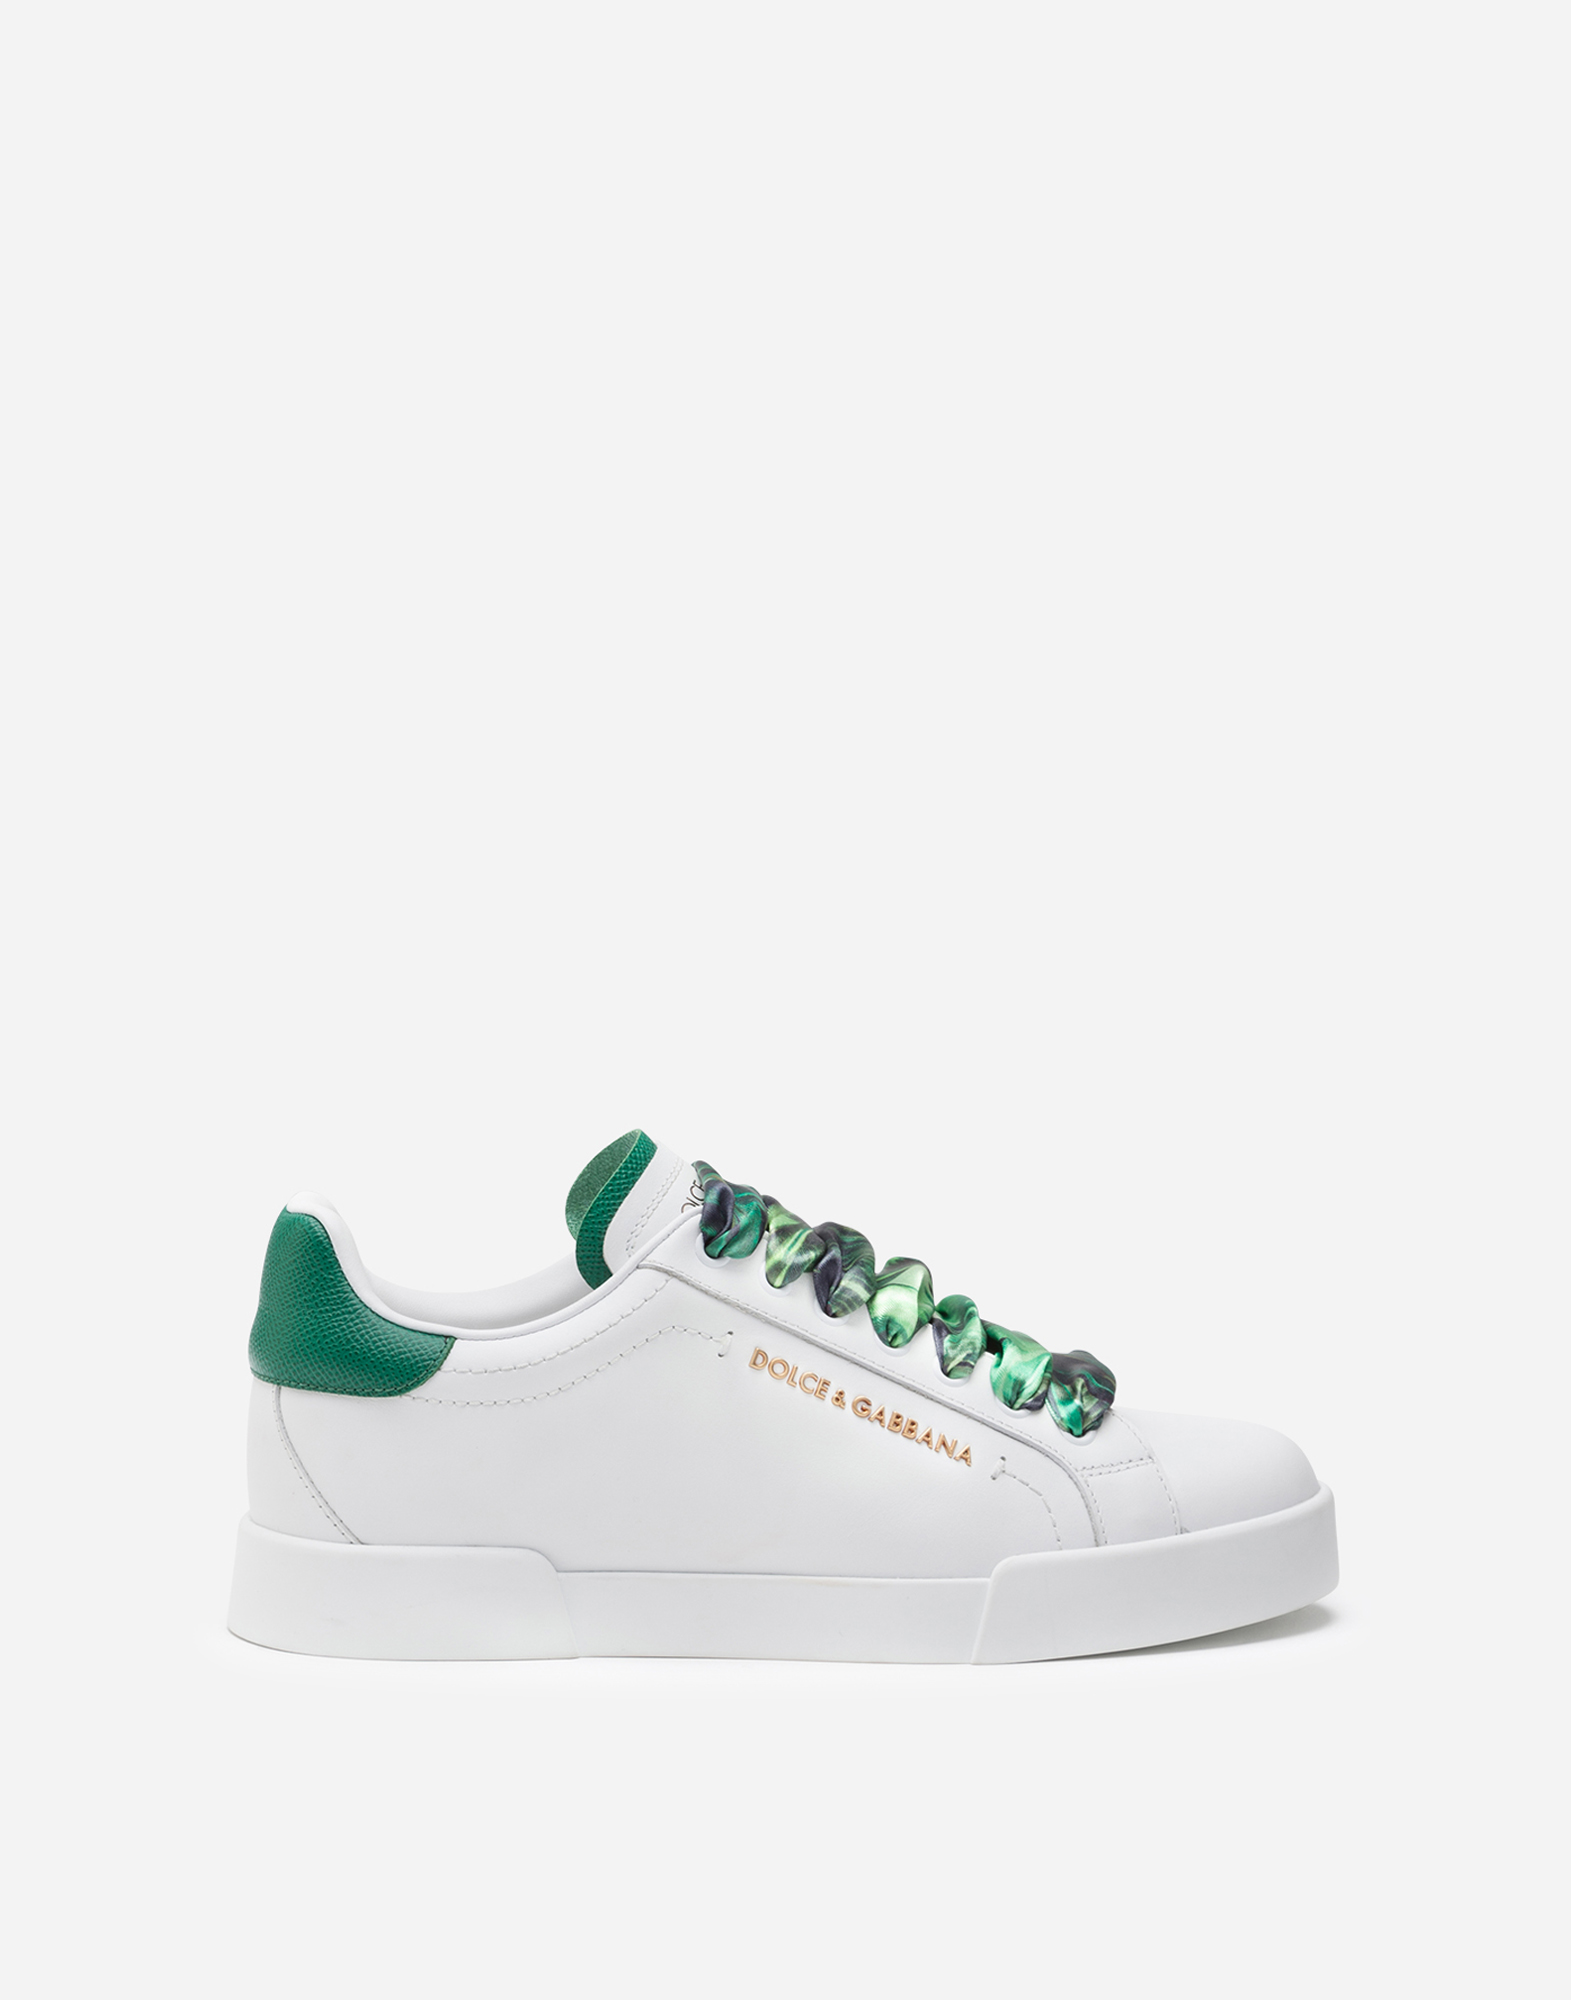 DOLCE & GABBANA Portofino sneakers in nappa calfskin with lettering and printed silk laces